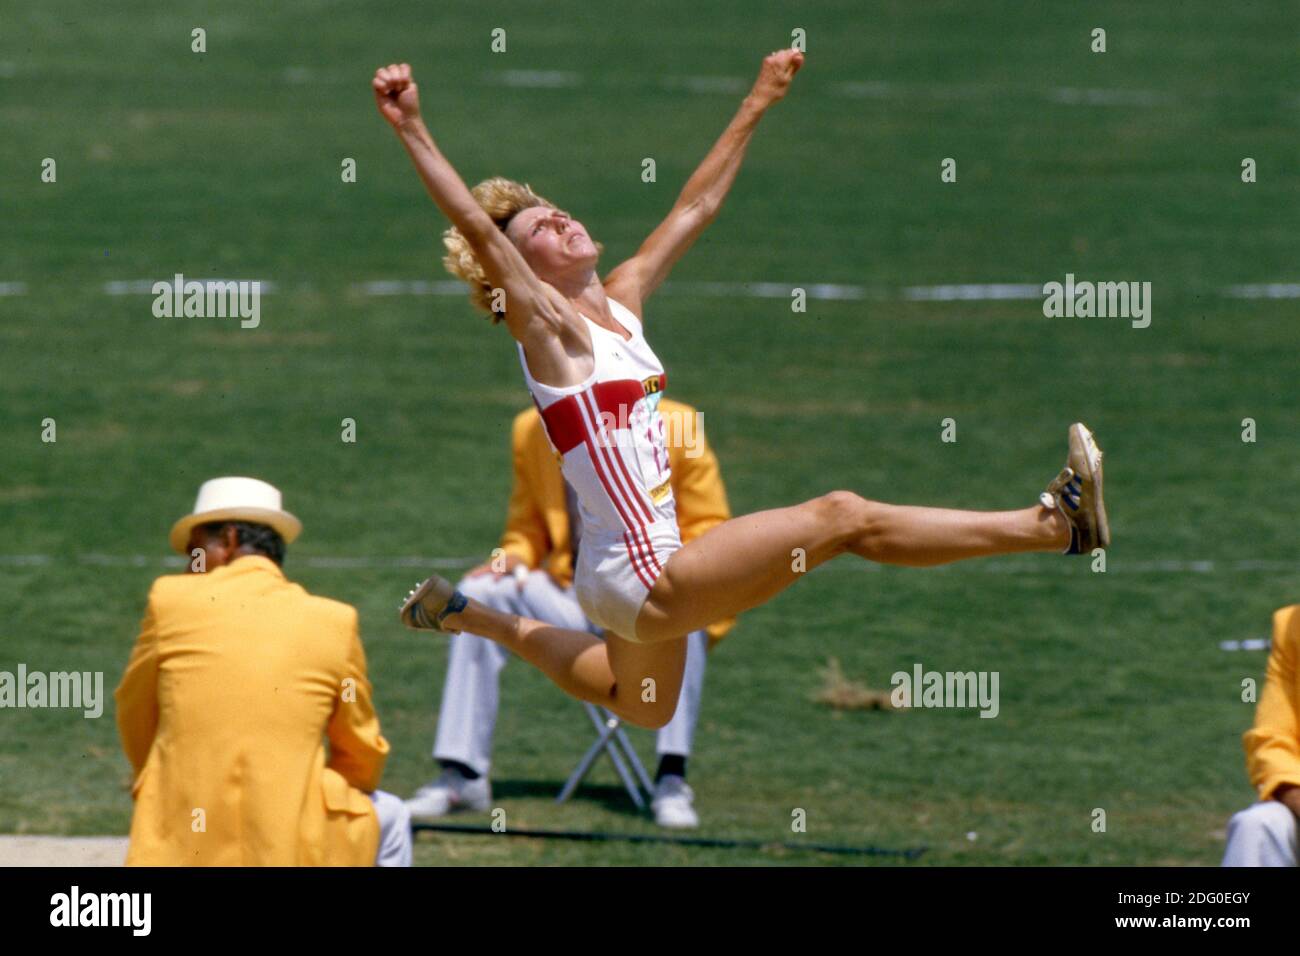 Sabine EVERTS, (withte) Germany, athletics, heptathlon, heptathlon, heptathlon, action long jump, games of the XXIII. Olympic Games 1984 Summer Games in Los Angeles USA from 28.07. until 08/12/1984, 08/04/1984. Â | usage worldwide Stock Photo